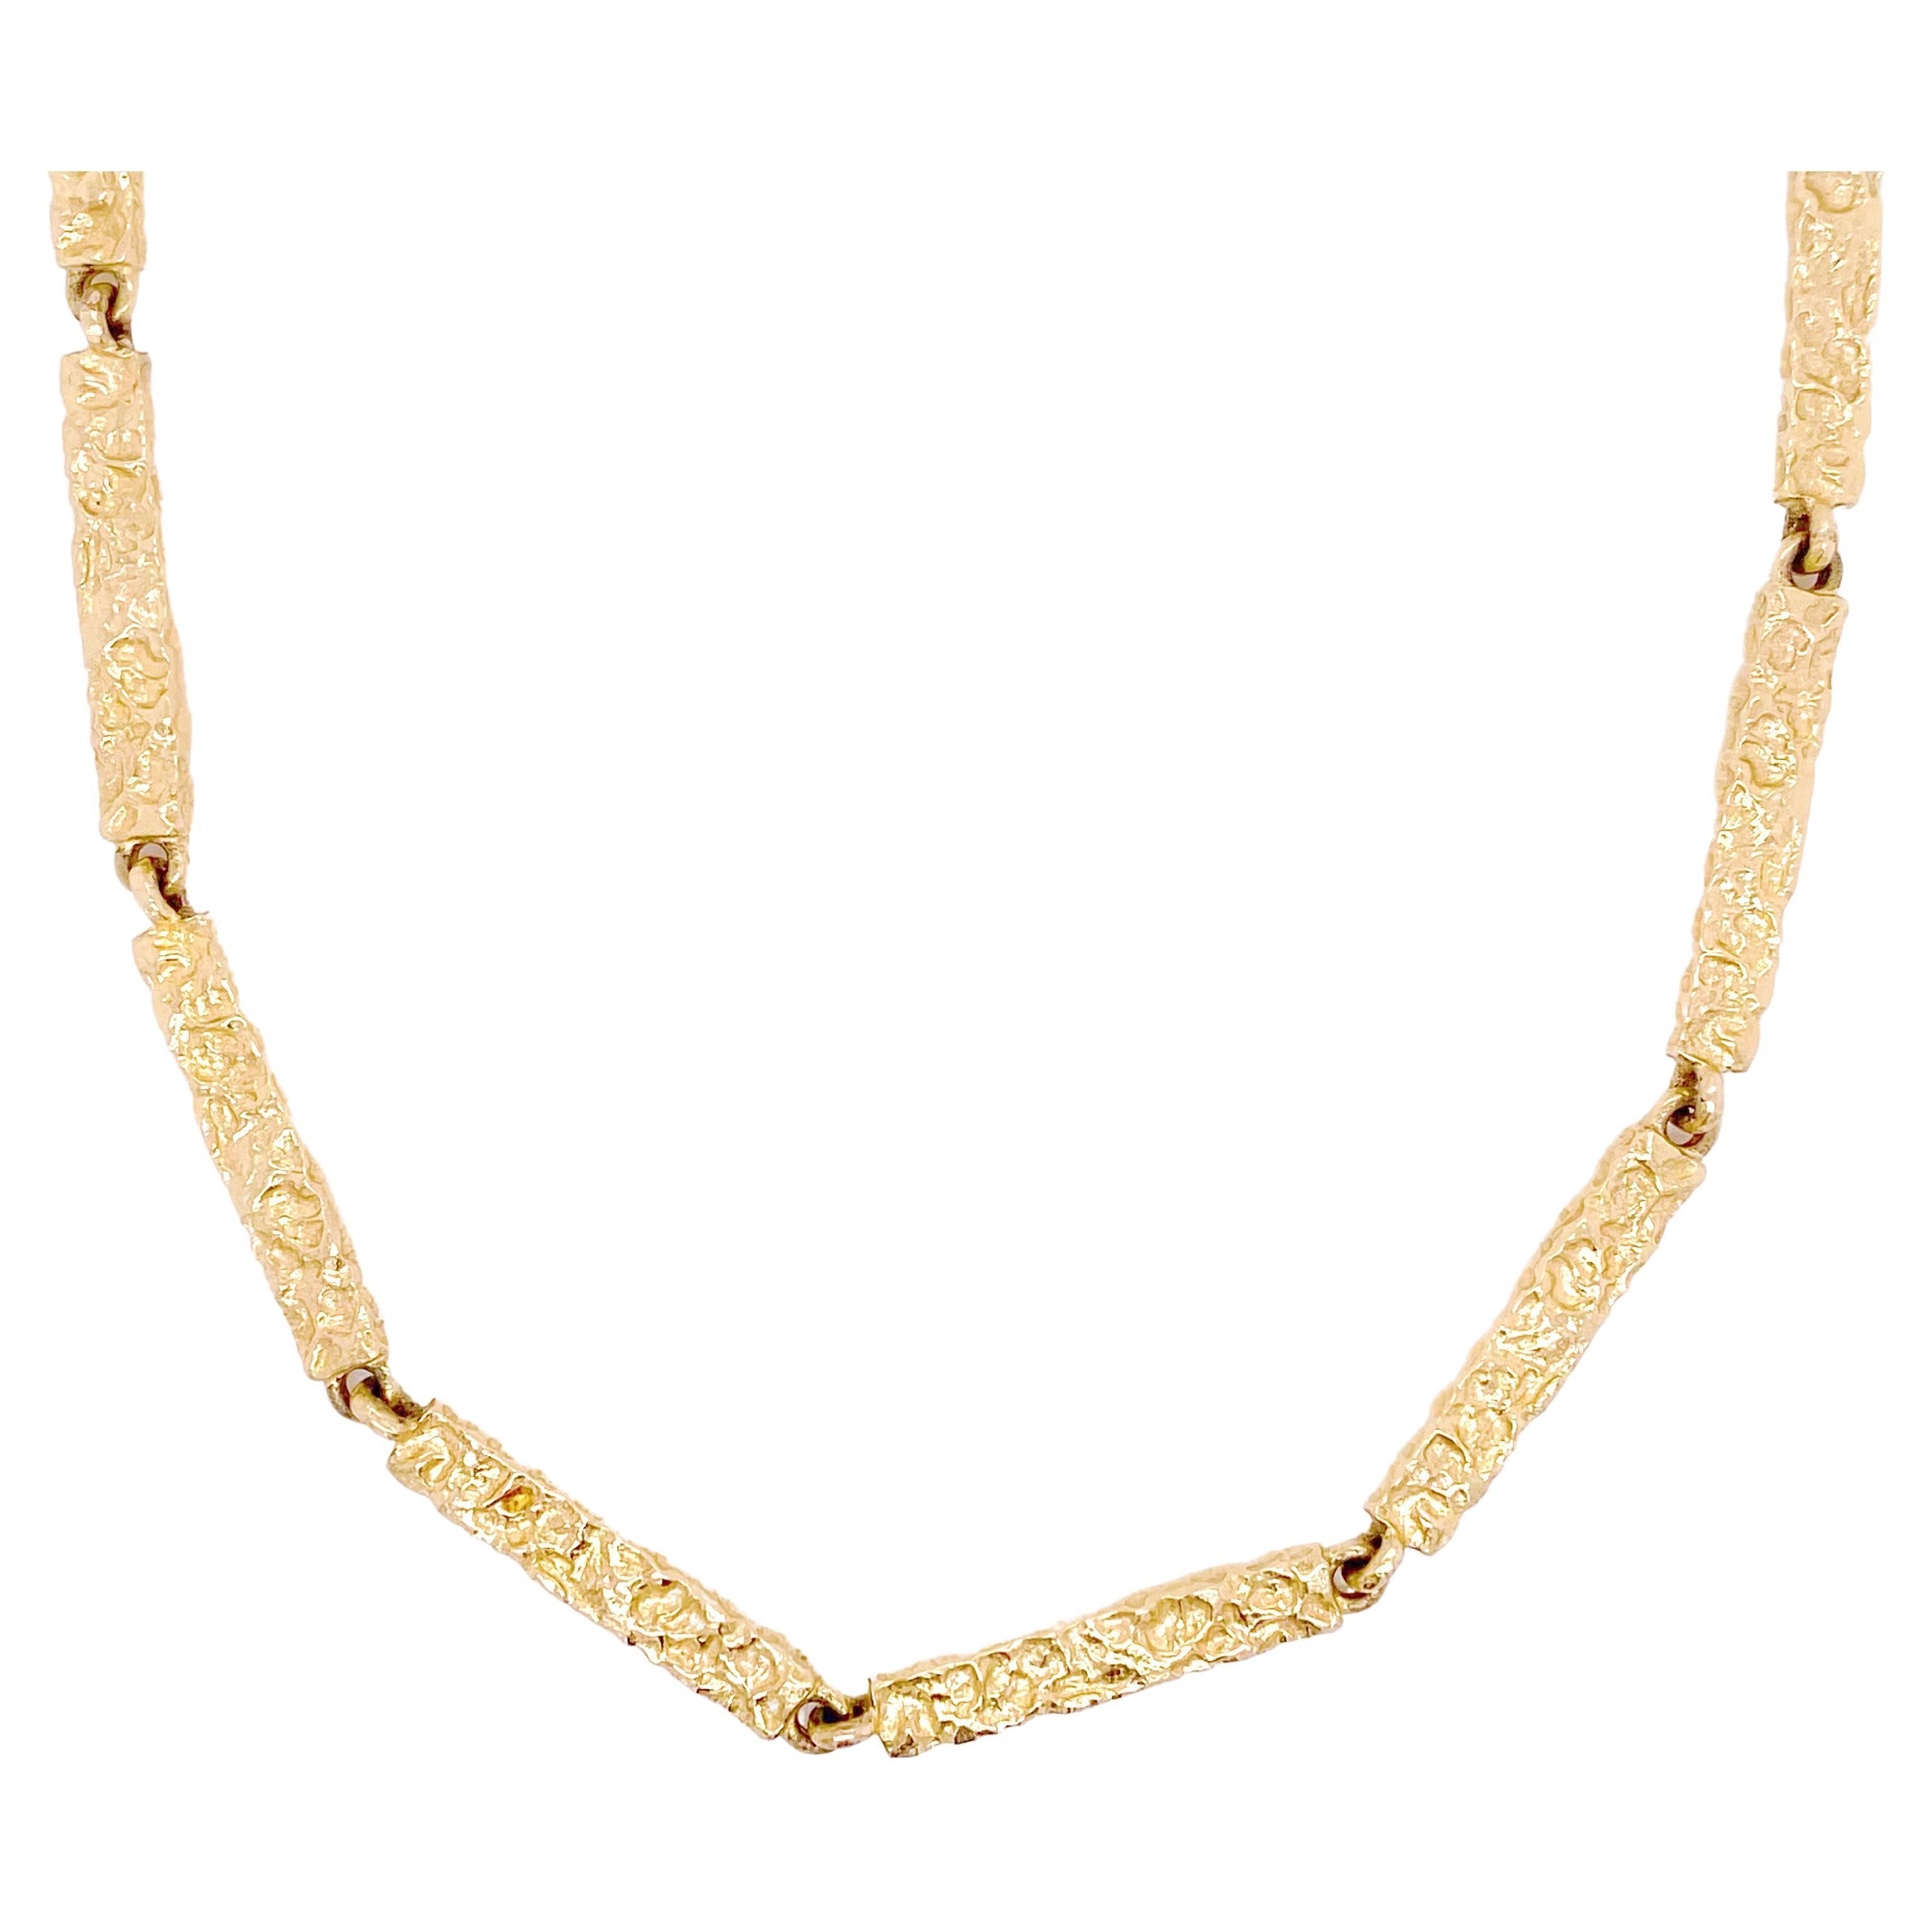 Nugget Gold Chain, Yellow Gold, Fancy Chain Necklace, Wide Link Chain